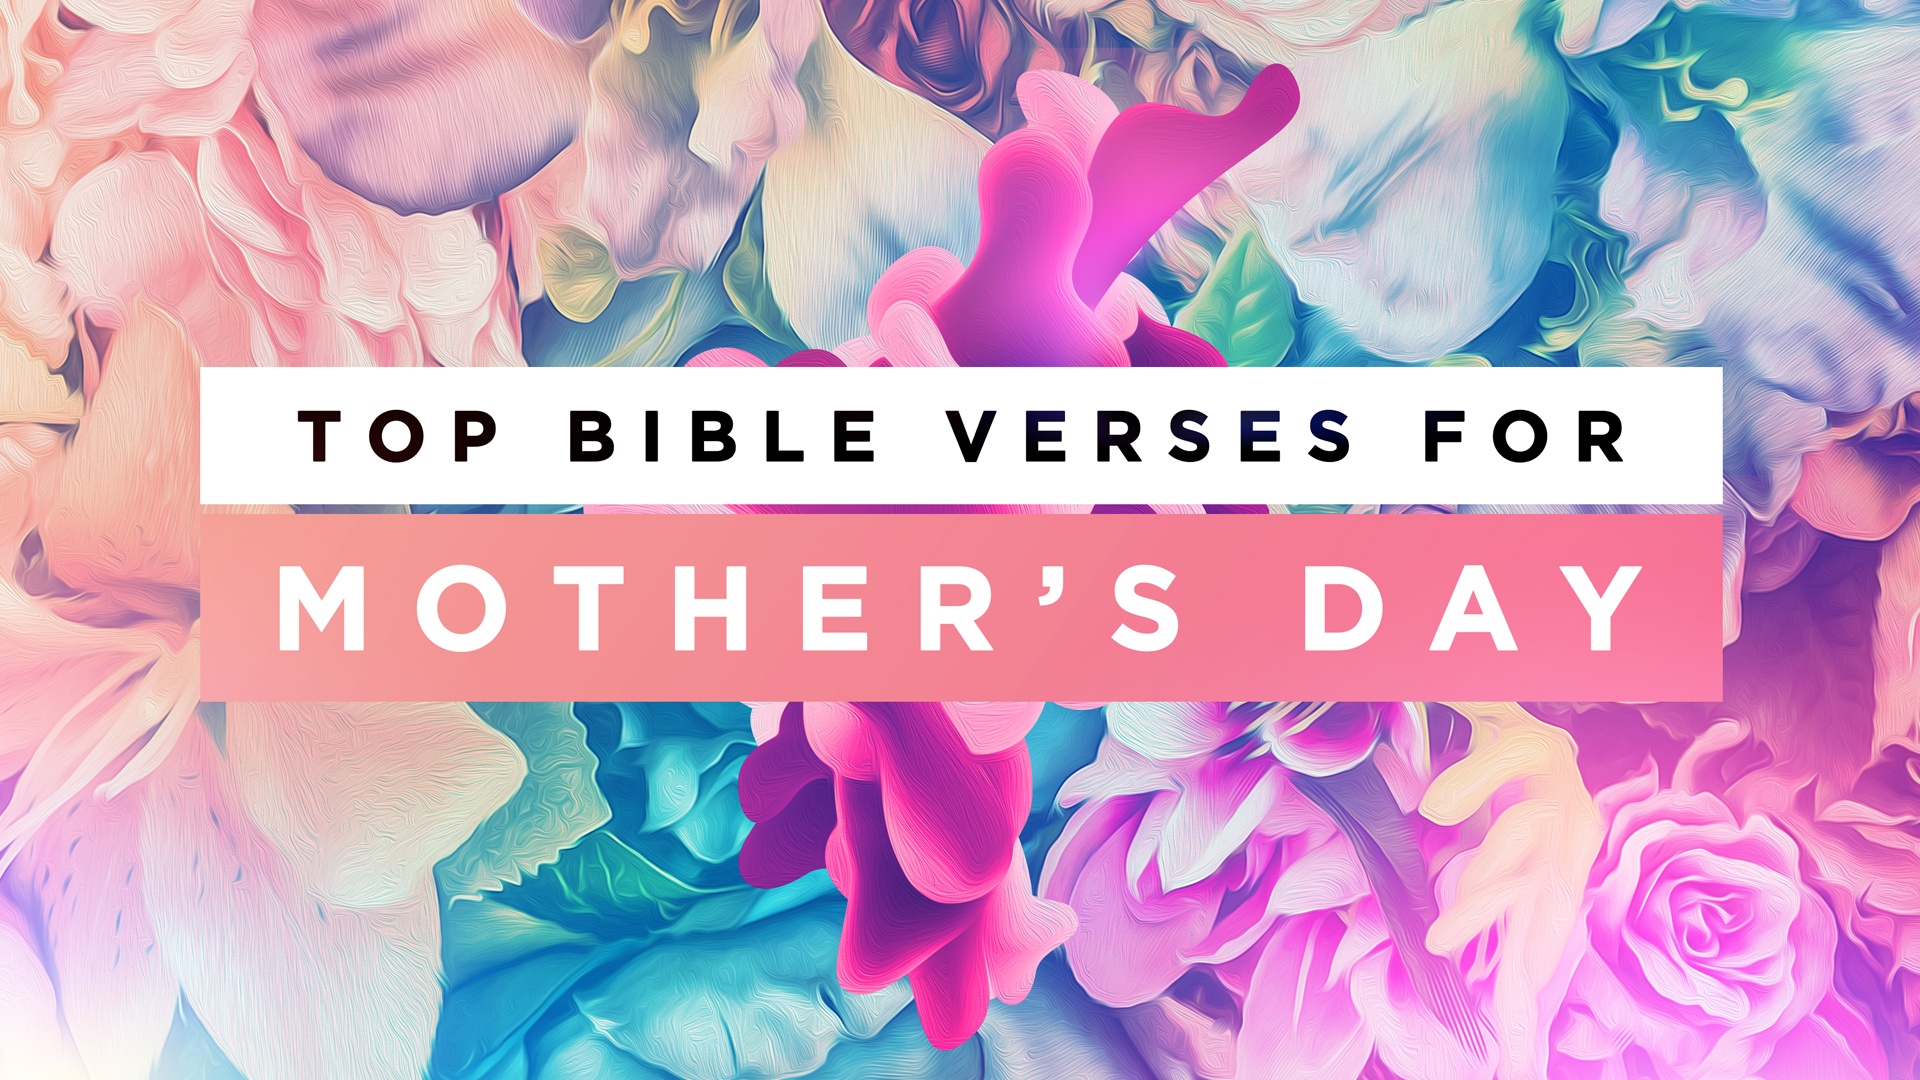 mother's day recognition ideas for church